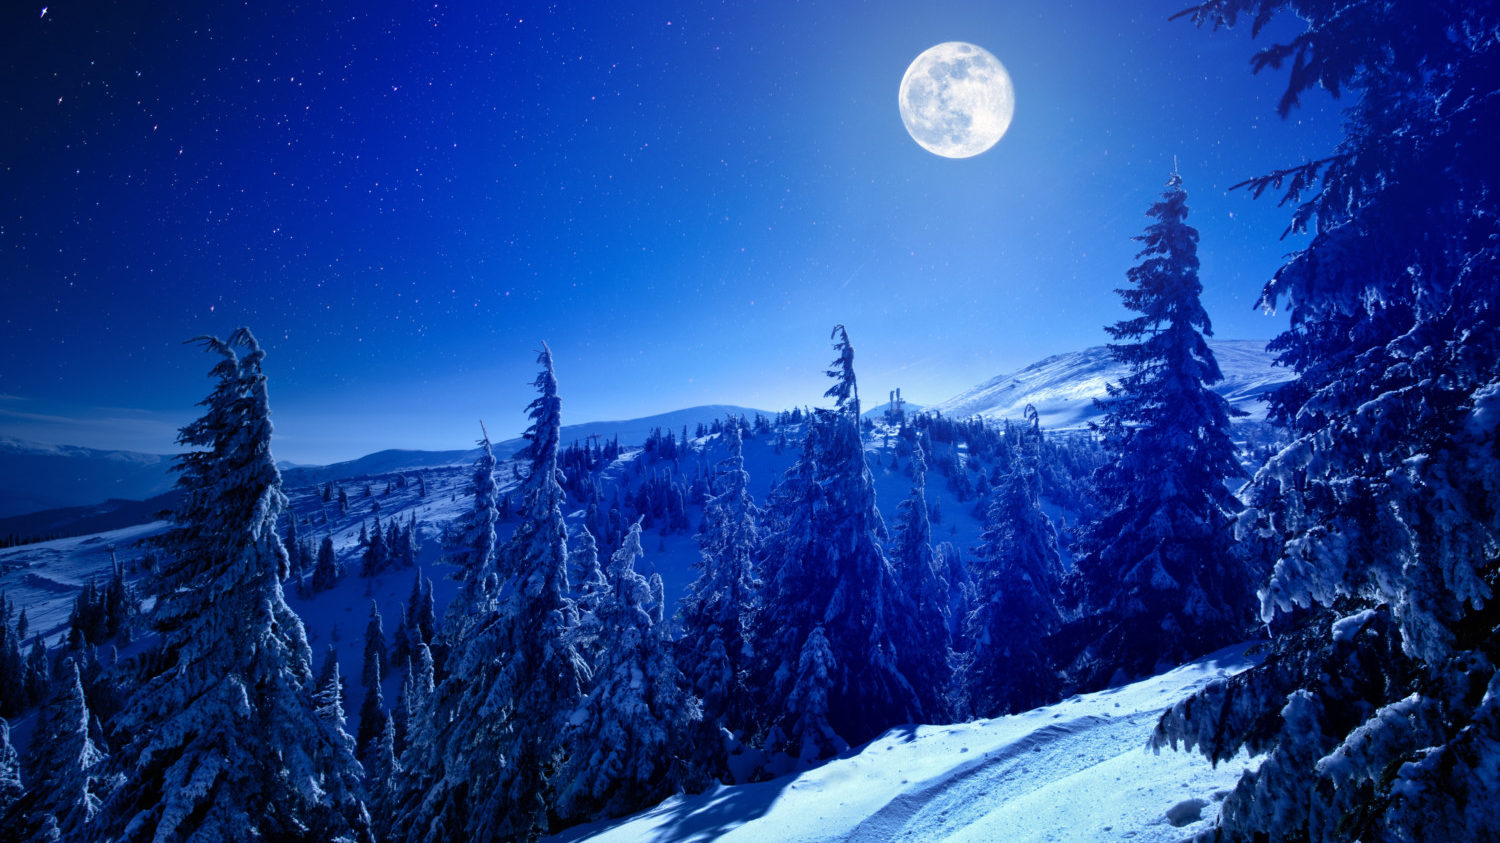 Full cold moon shining brightly during wintertime